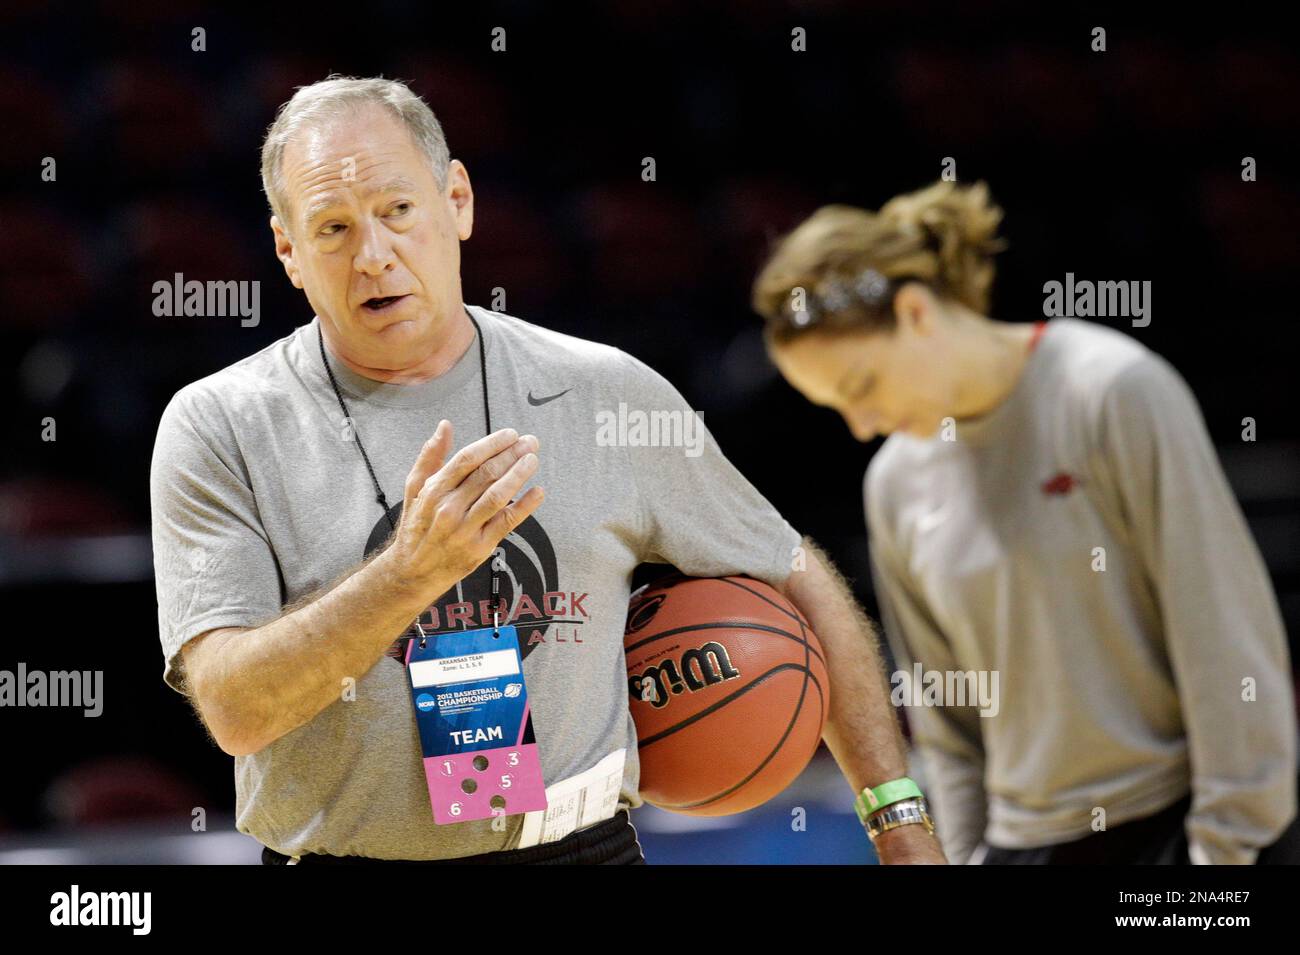 Arkansas women's basketball coach Tom Collen during basketball practice in  College Station, Texas, Friday, March 16, 2012. Arkansas plays Dayton in an  NCAA tournament first-round women's college basketball game on Saturday. (AP